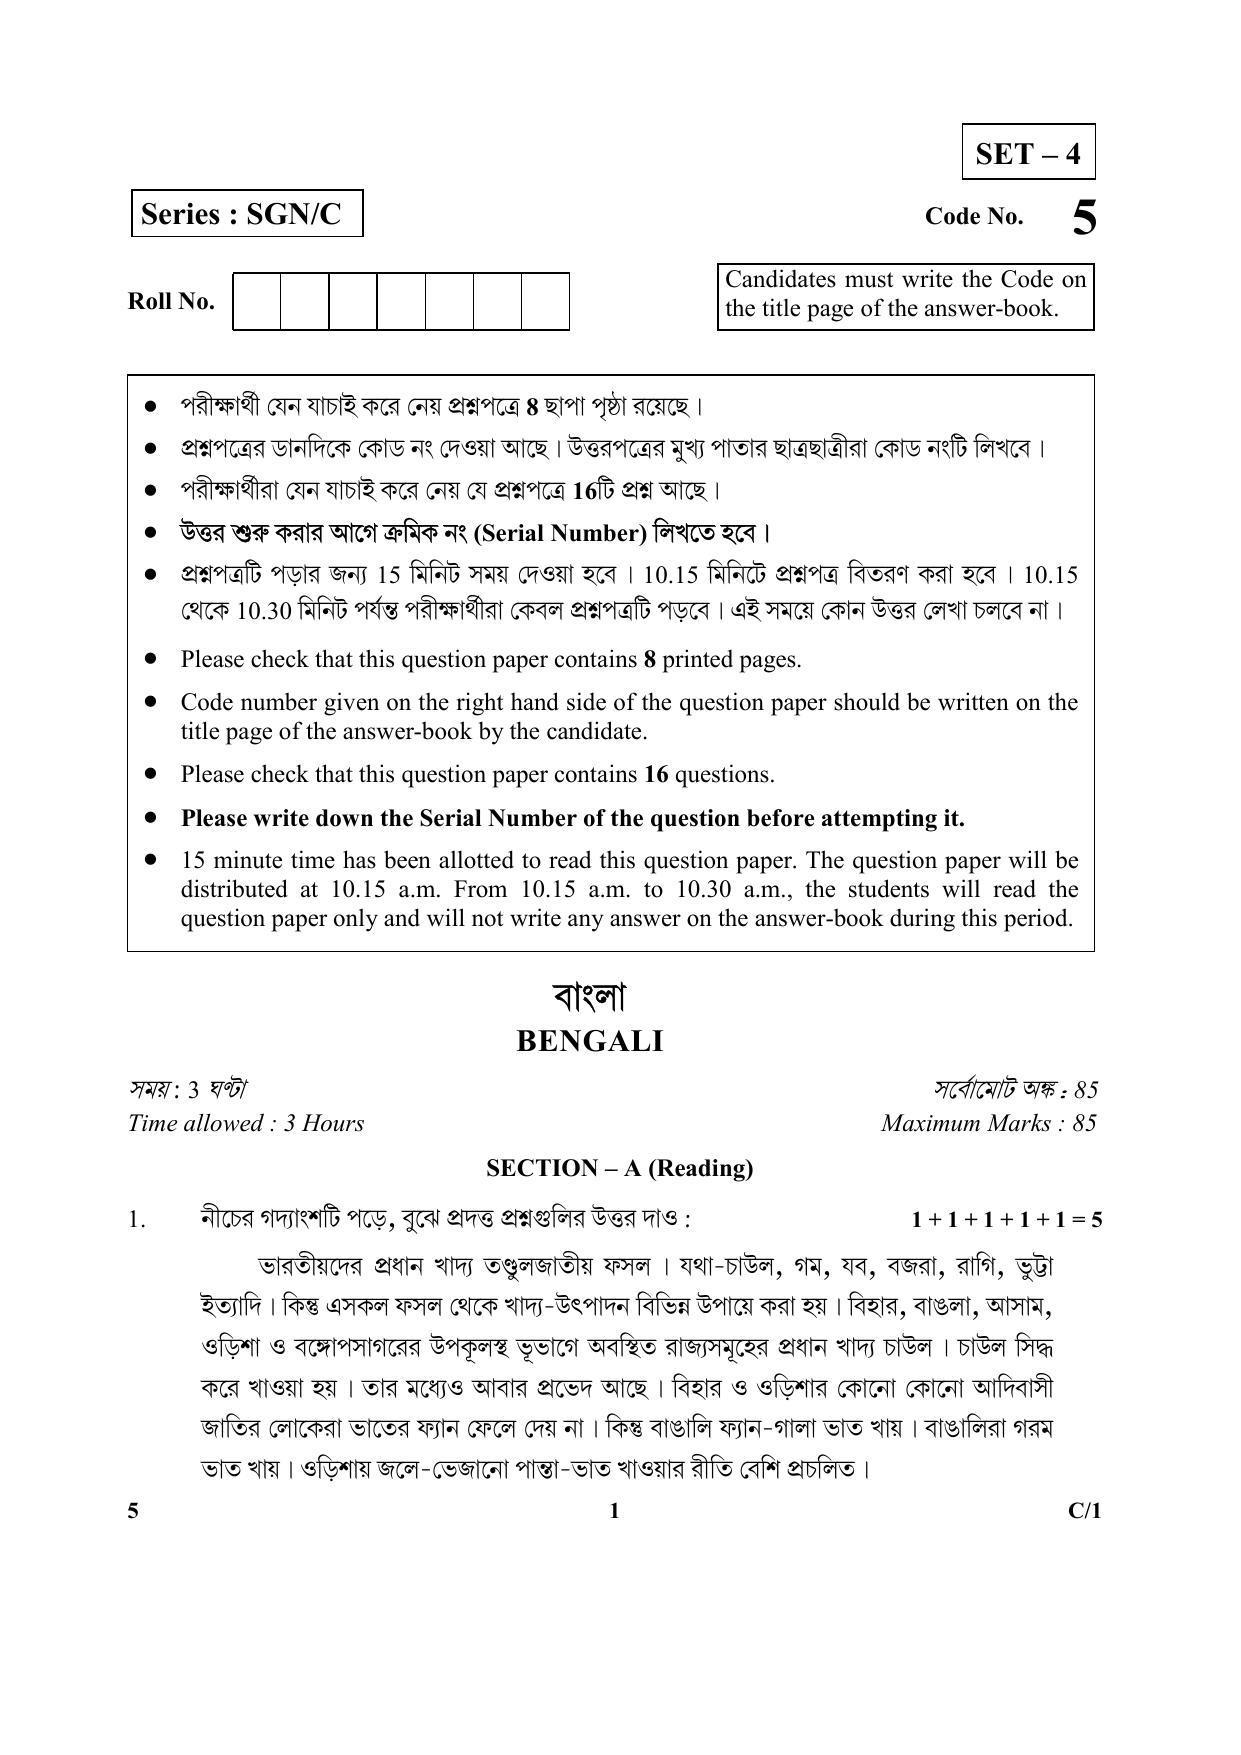 CBSE Class 12 5 (Bengali) 2018 Compartment Question Paper - Page 1